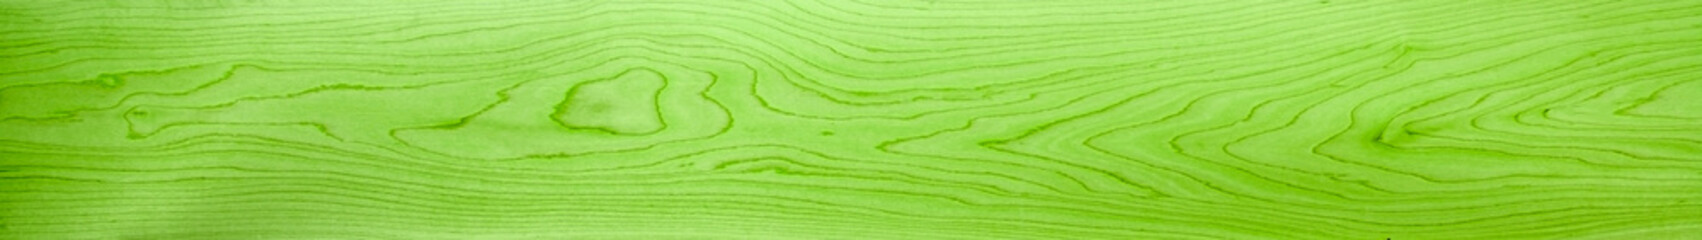 Green wood panorama for banners, design, backdrops and headers - with abstract grain patterns, in a...